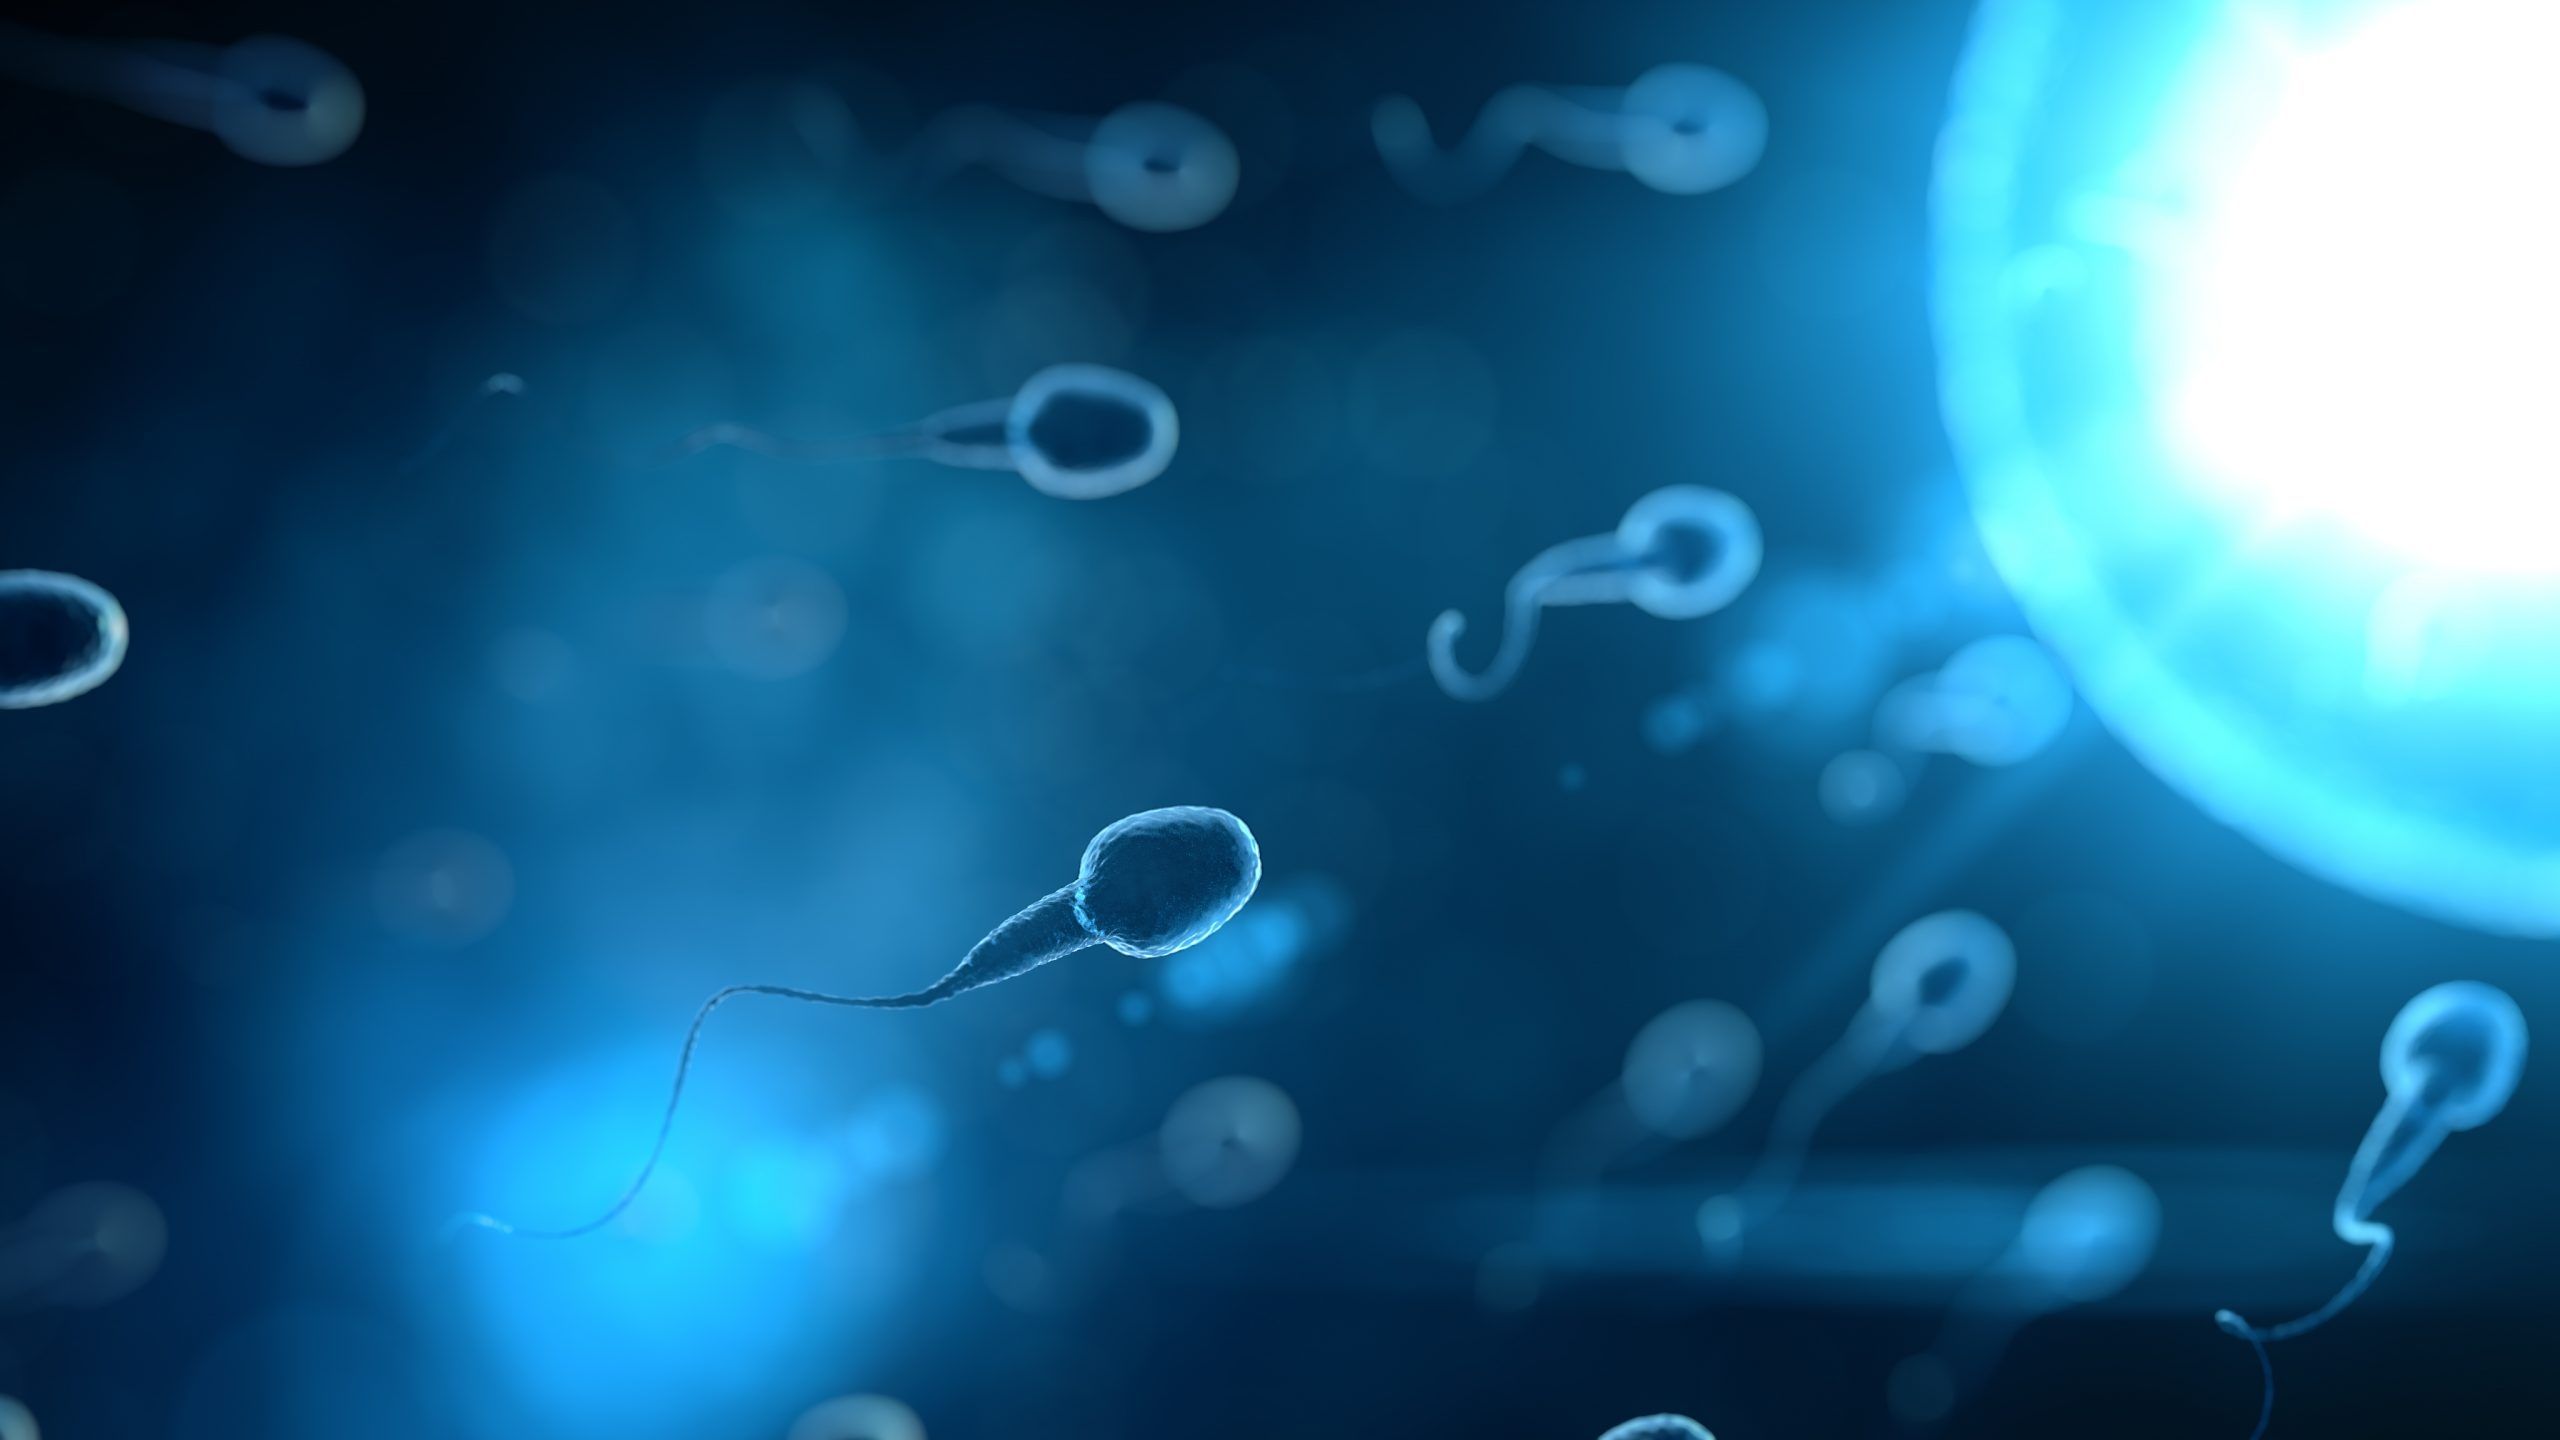 An Israeli-led study has found sperm counts have plummeted by 62% in under 50 years, and the findings have implications for the future of the human race.